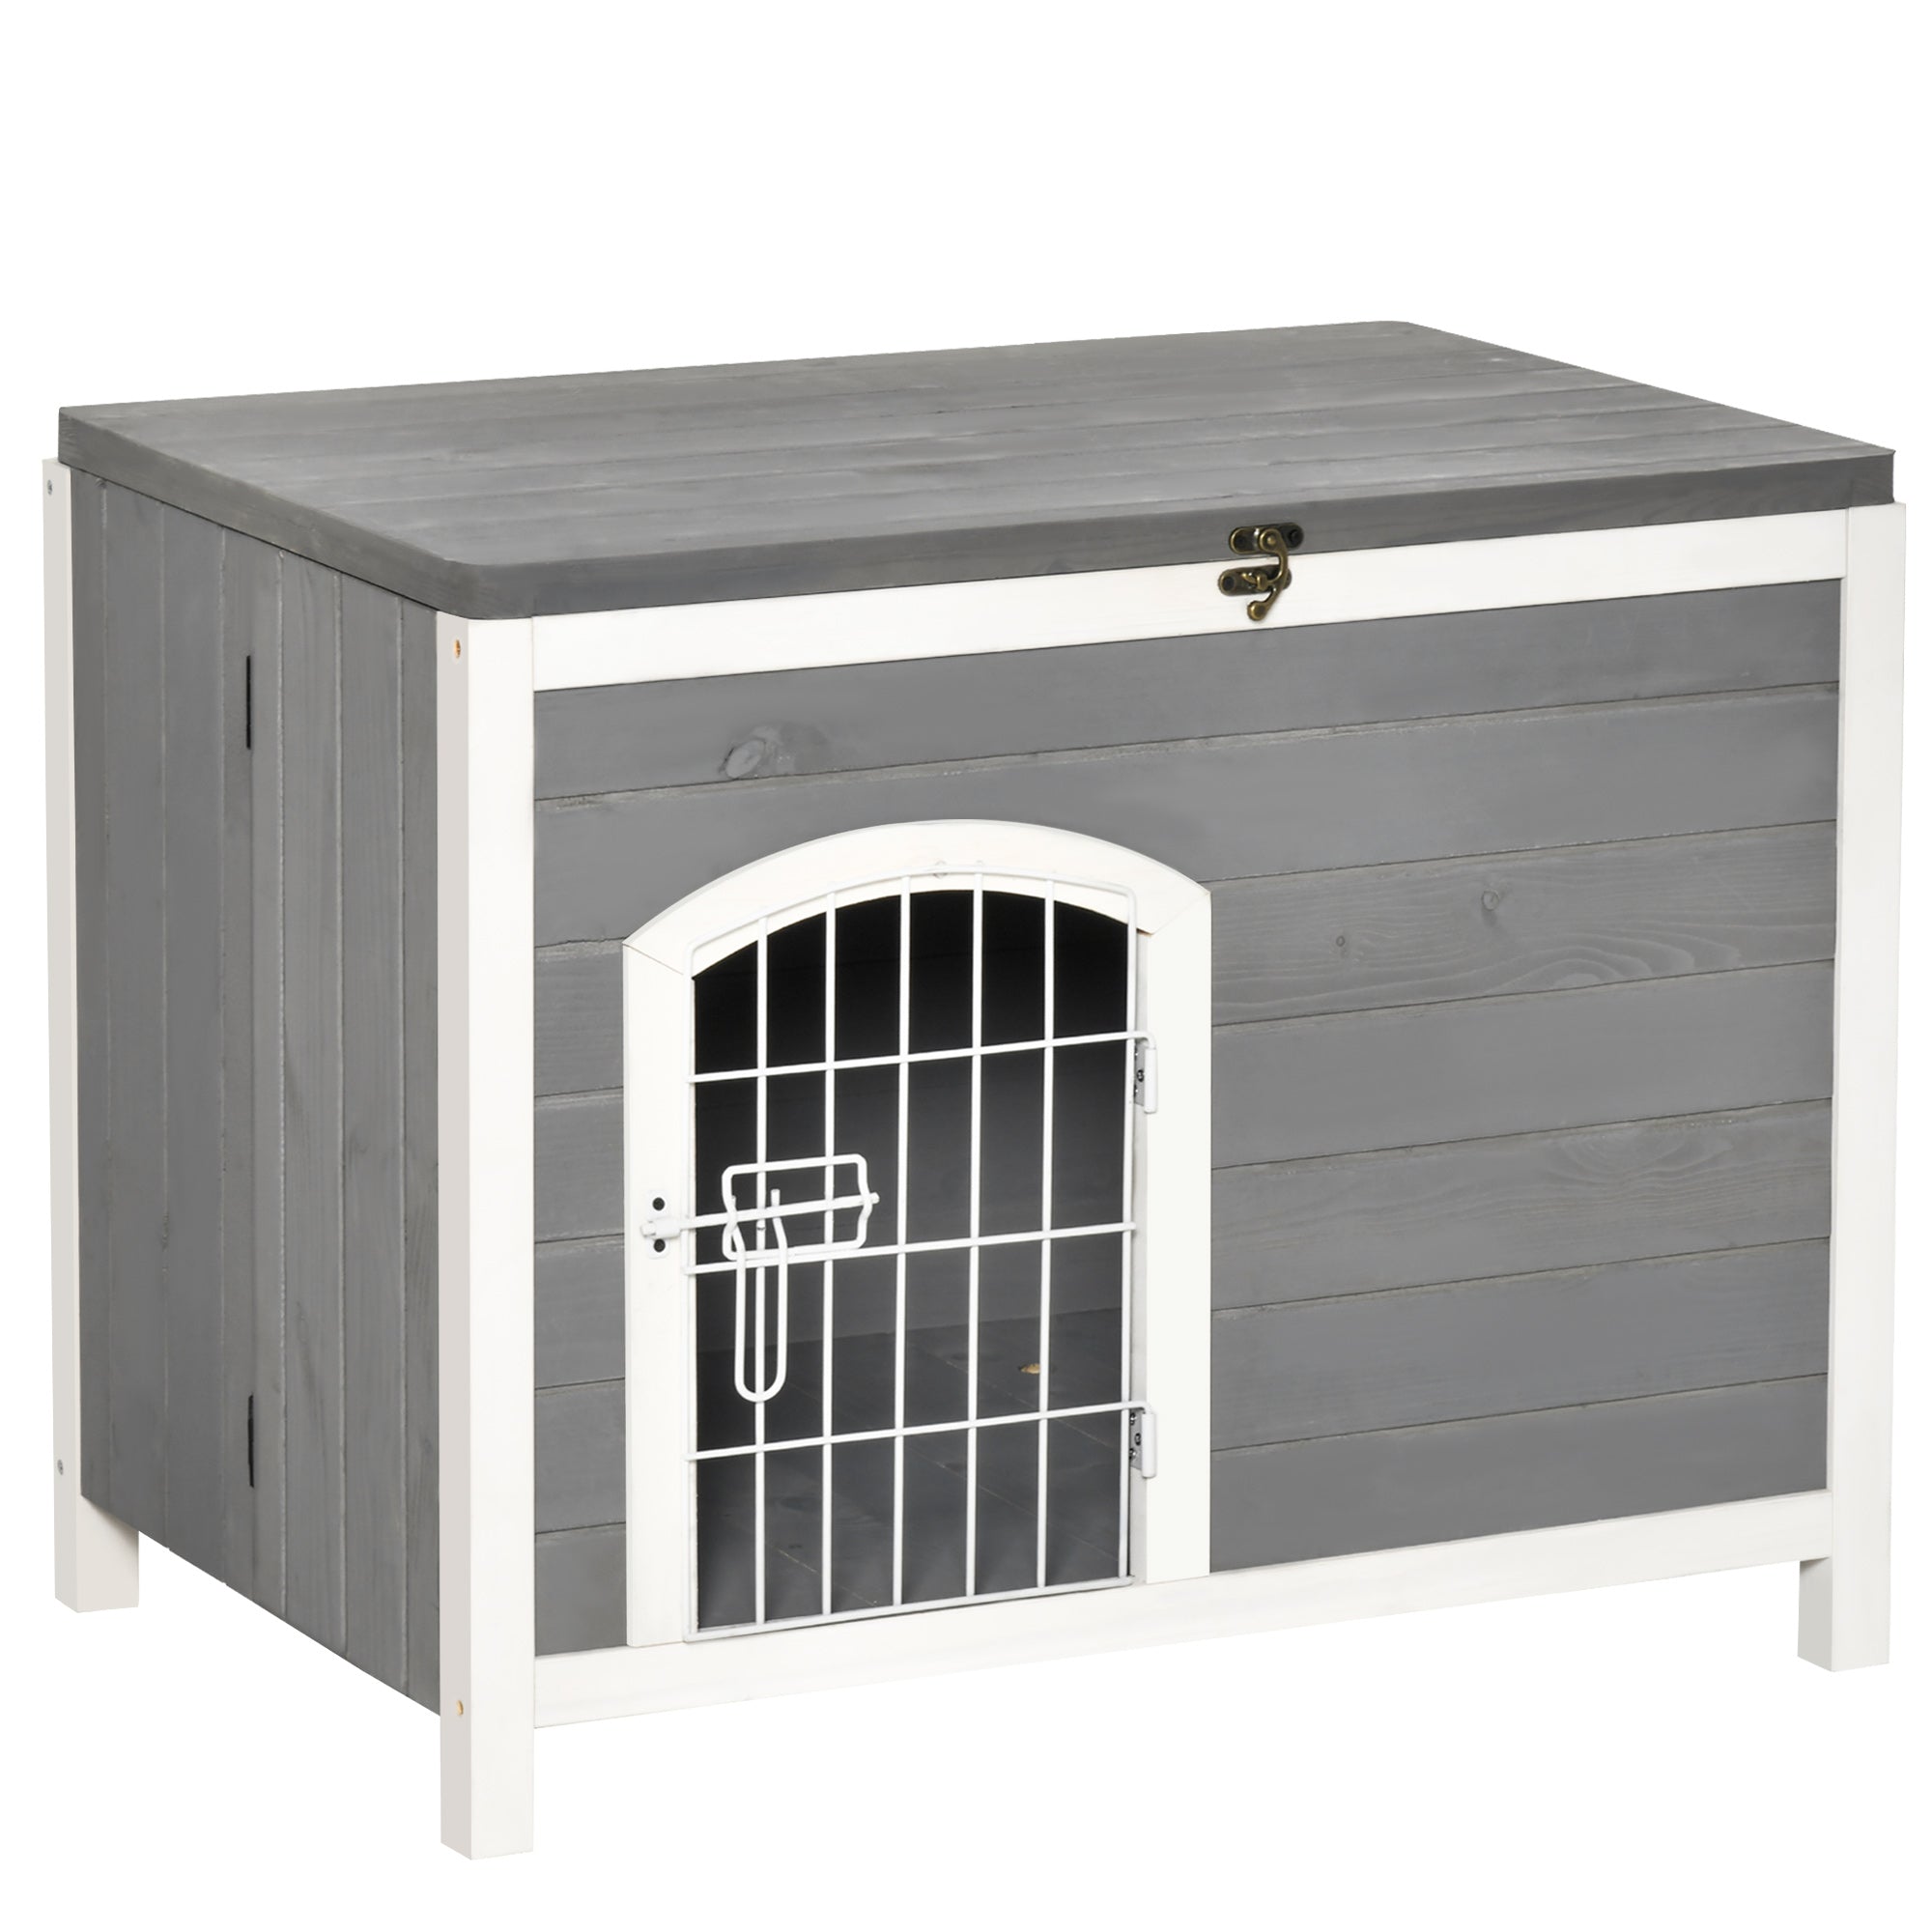 Andoer Foldable Raised Wooden Dog House Indoor and Outdoor Dog Cage Kennel Cat House w/ Lockable Door Openable Roof Removable Bottom for Small and Medium Pets Grey